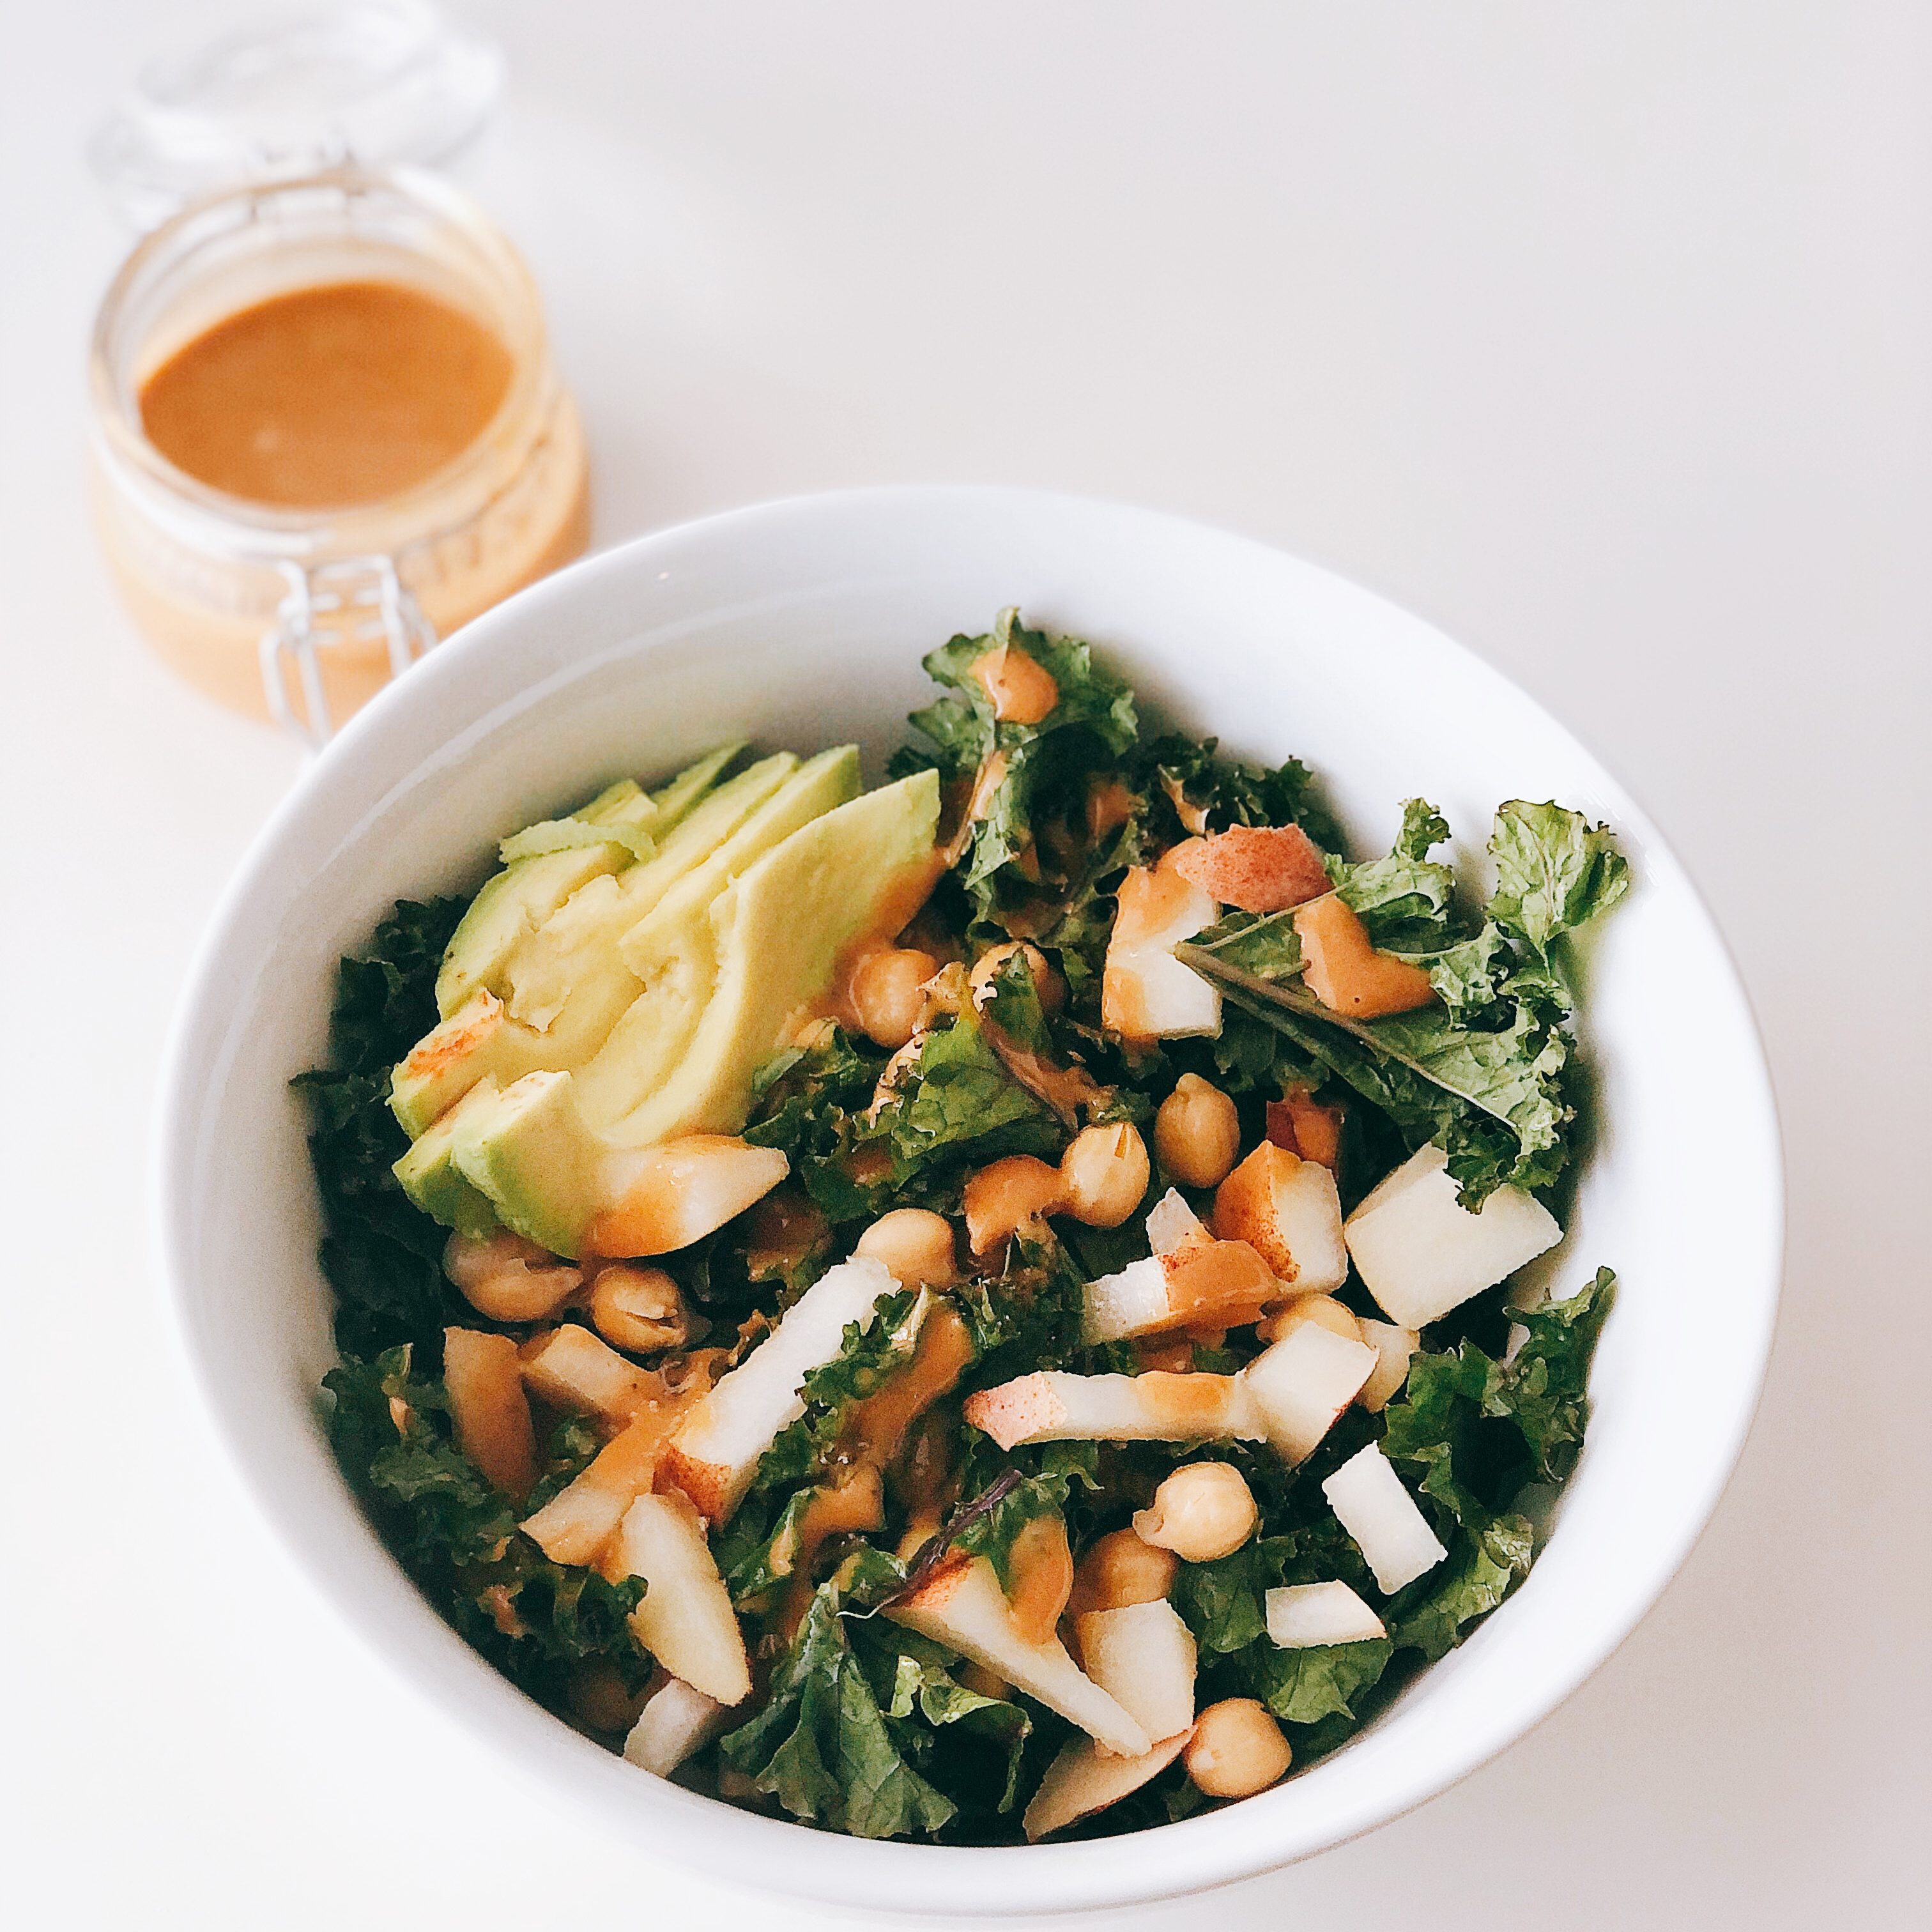 Pear, Avocado and Miso Salad in 15-minutes